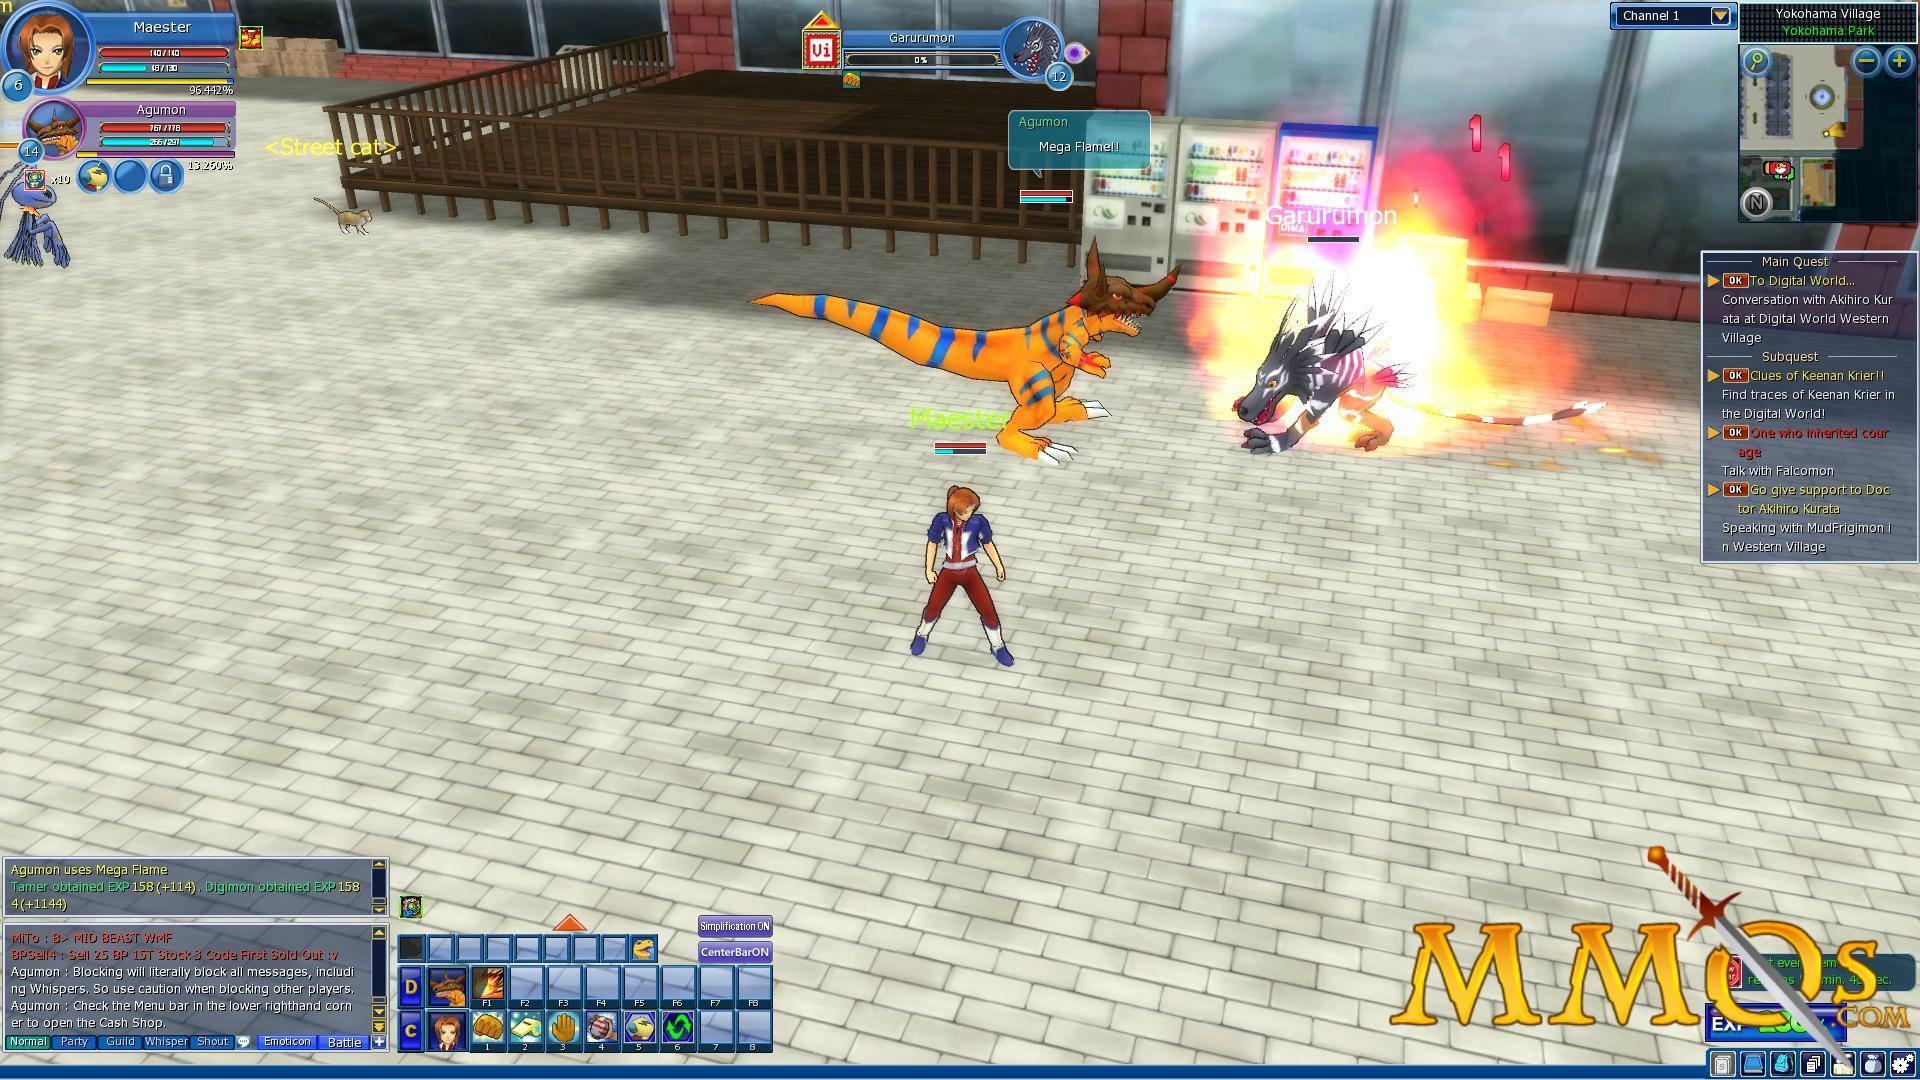 Download – Digimon Masters Online – PC:  #Digimon  #DigimonMastersOnline #DigimonMasters #MMO #RPG #Game